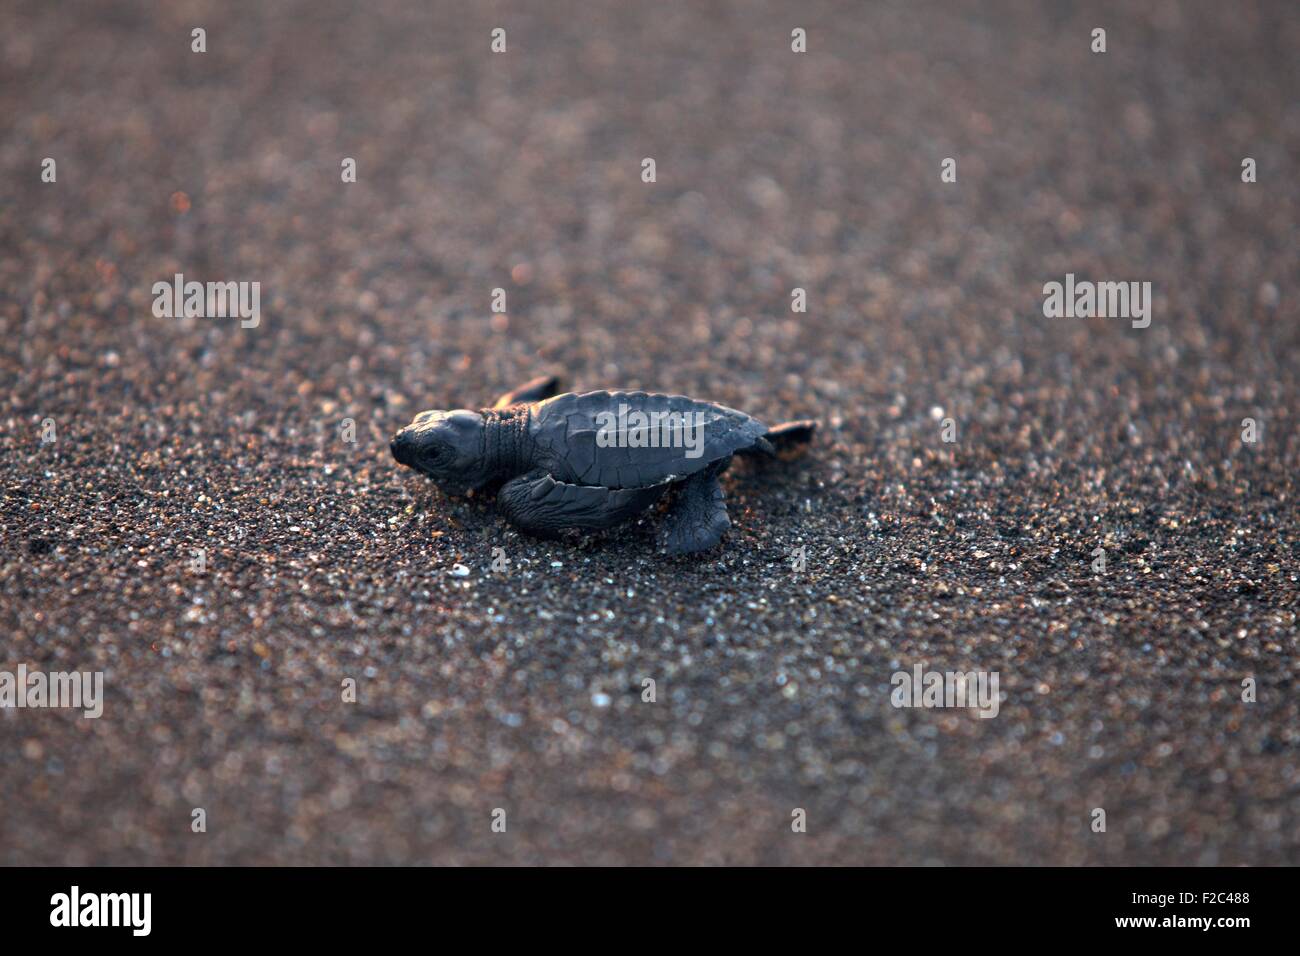 one olive-ridley sea turtle hatchling on a black sand beach Stock Photo